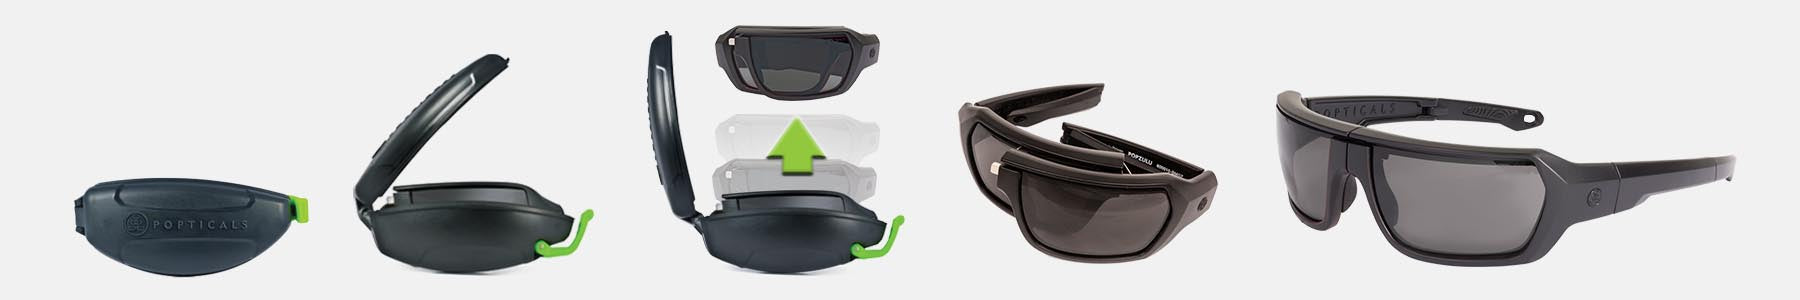 POPZULU - Ballistic Eyewear, Tactical Sunglasses and Safety glasses - True Portability without sacrificing quality